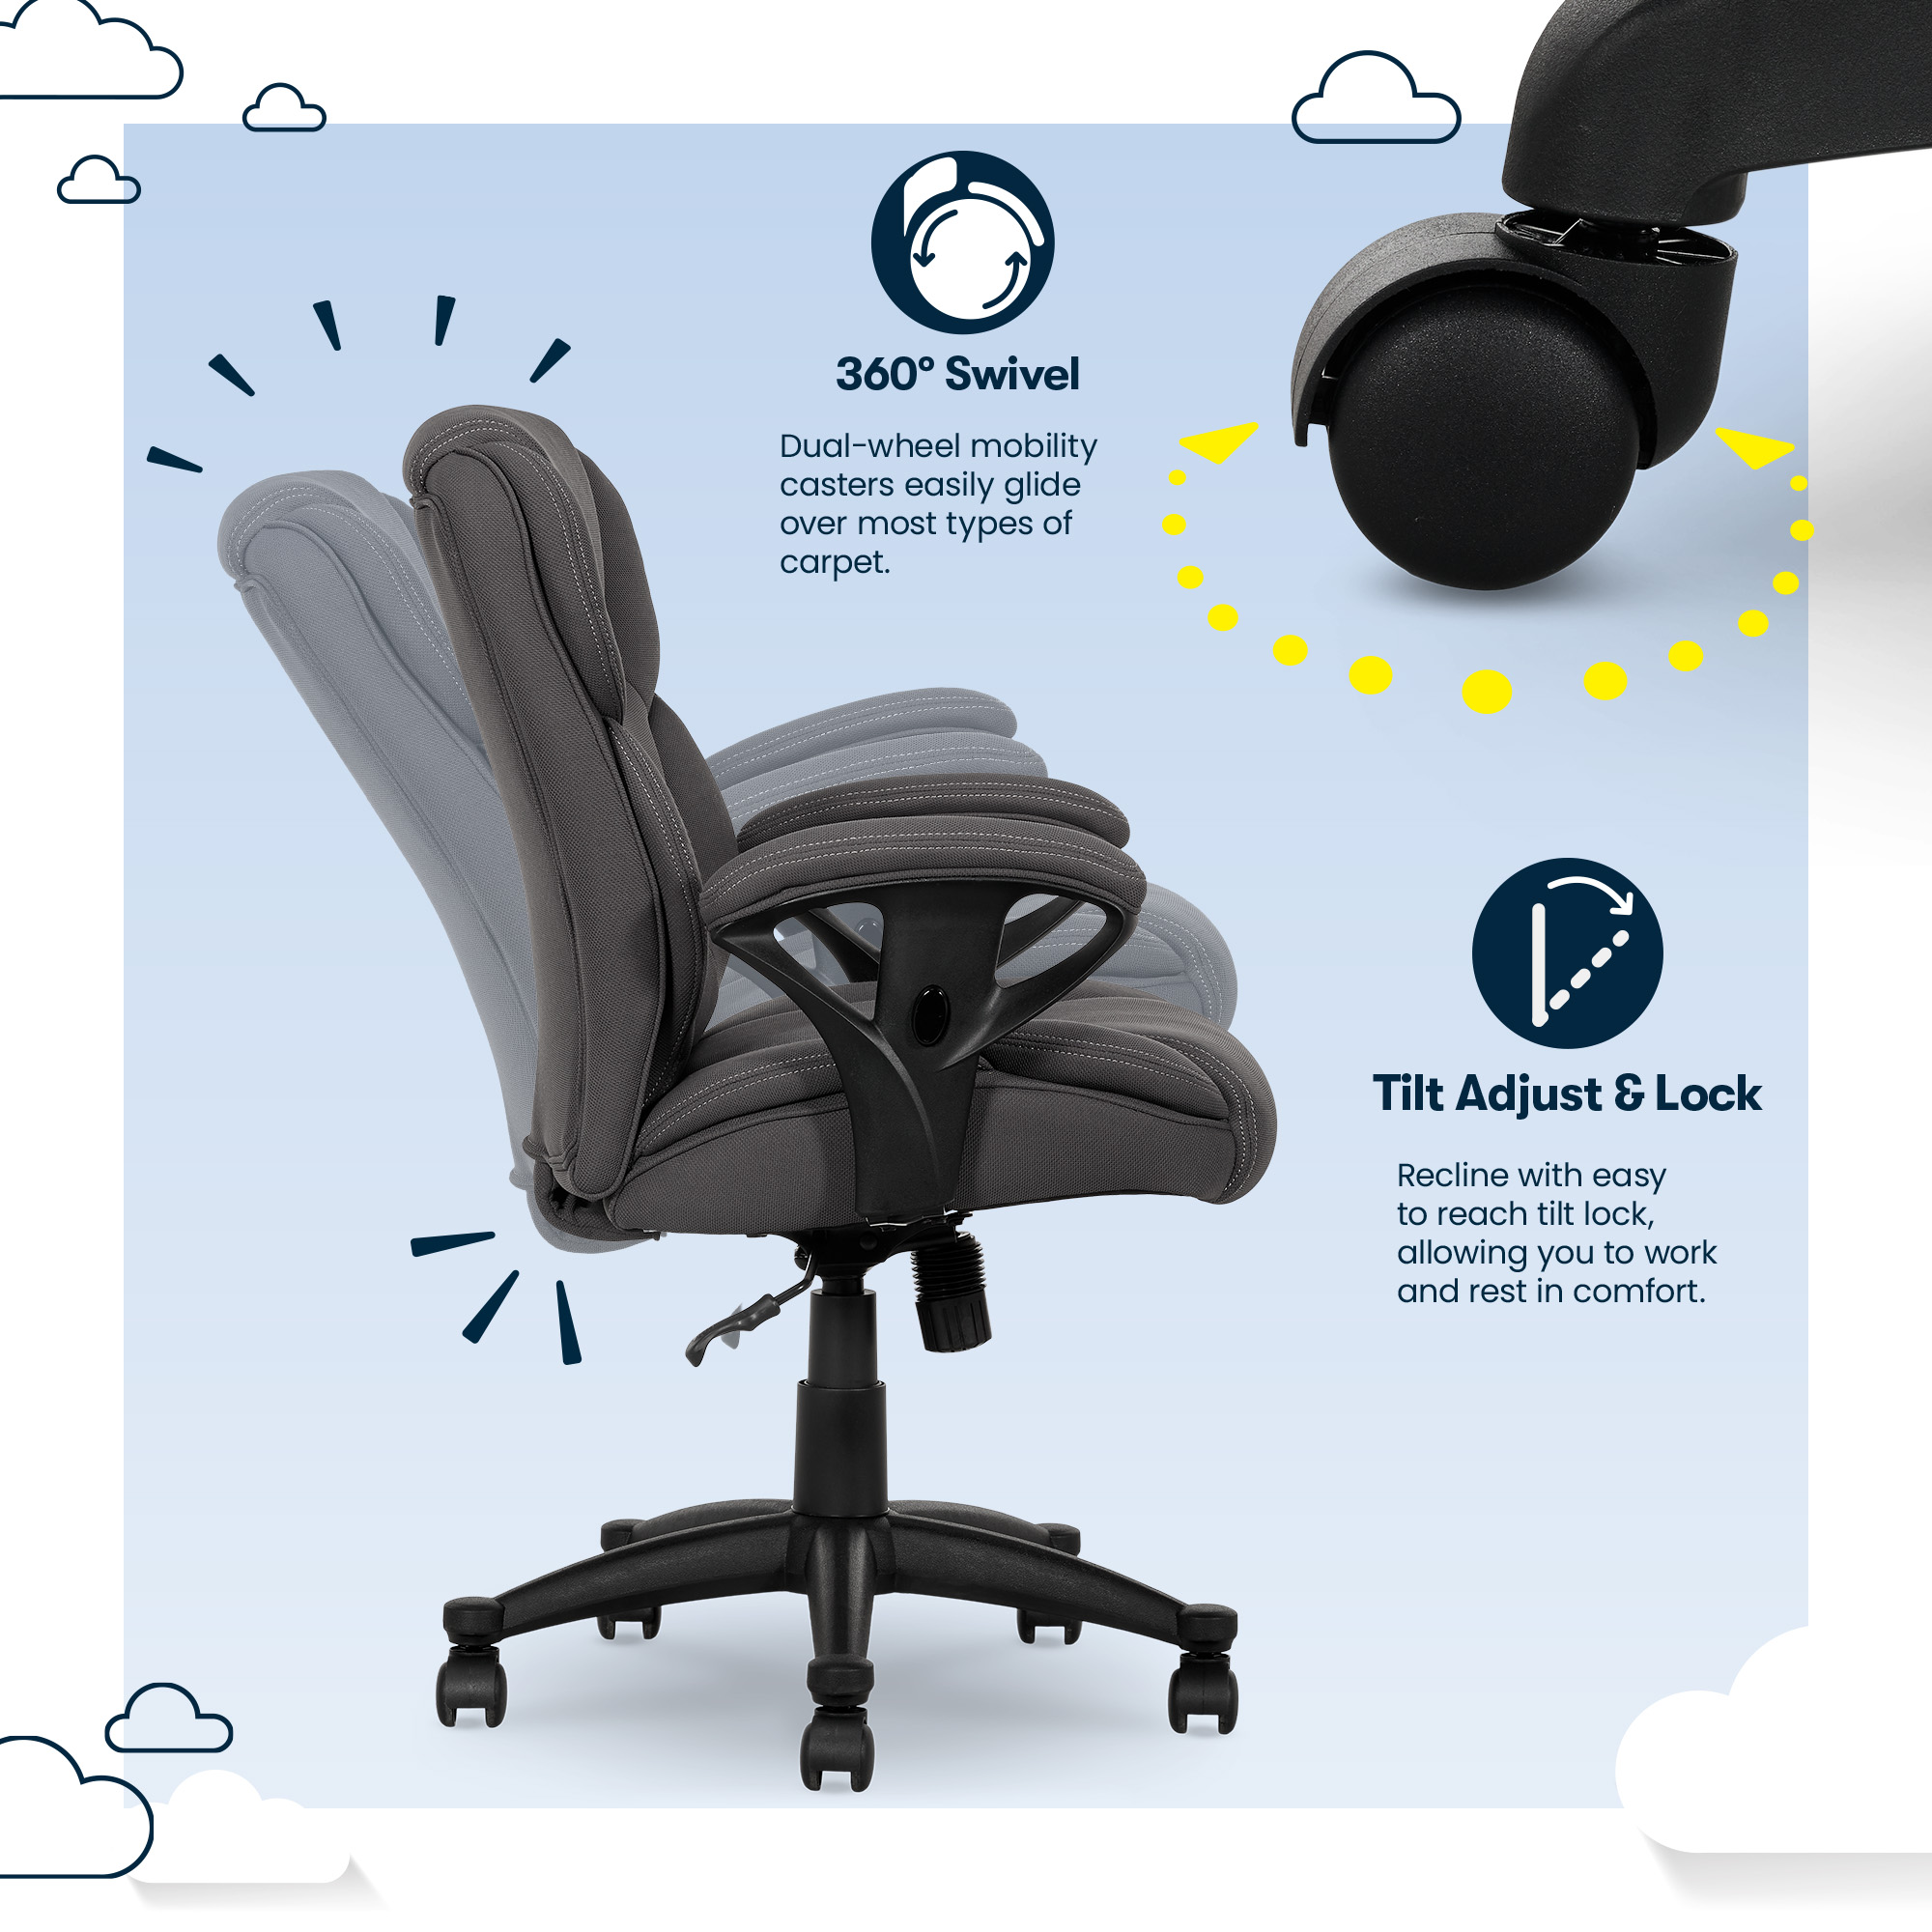 Serta Commercial Grade Task Office Chair, Supports up to 300 lbs., Dark Gray - image 5 of 15